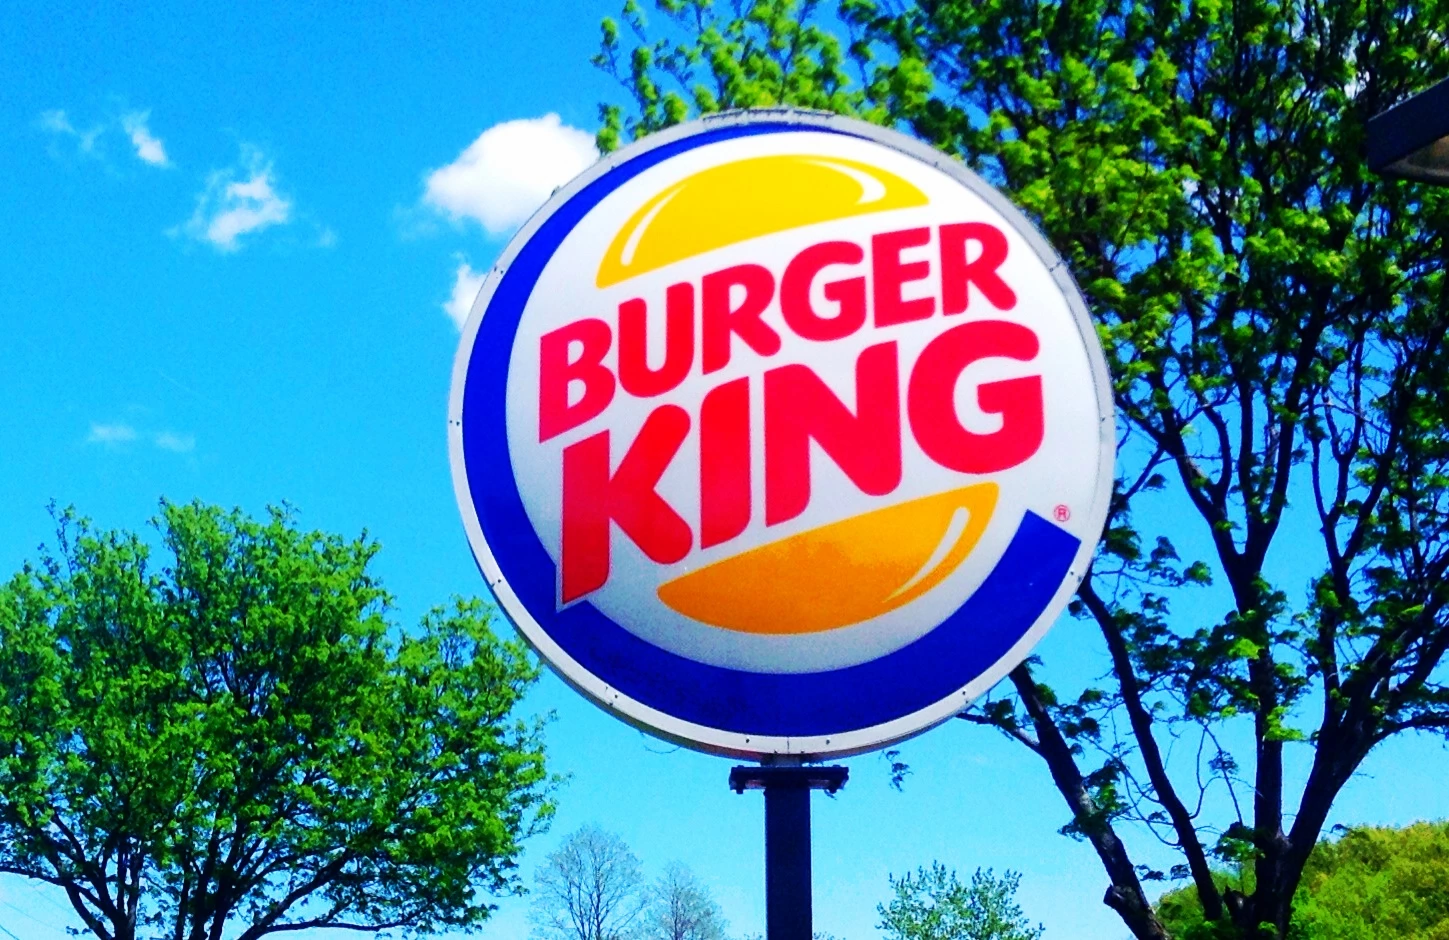 Burger King teamed up with tech startup Waves